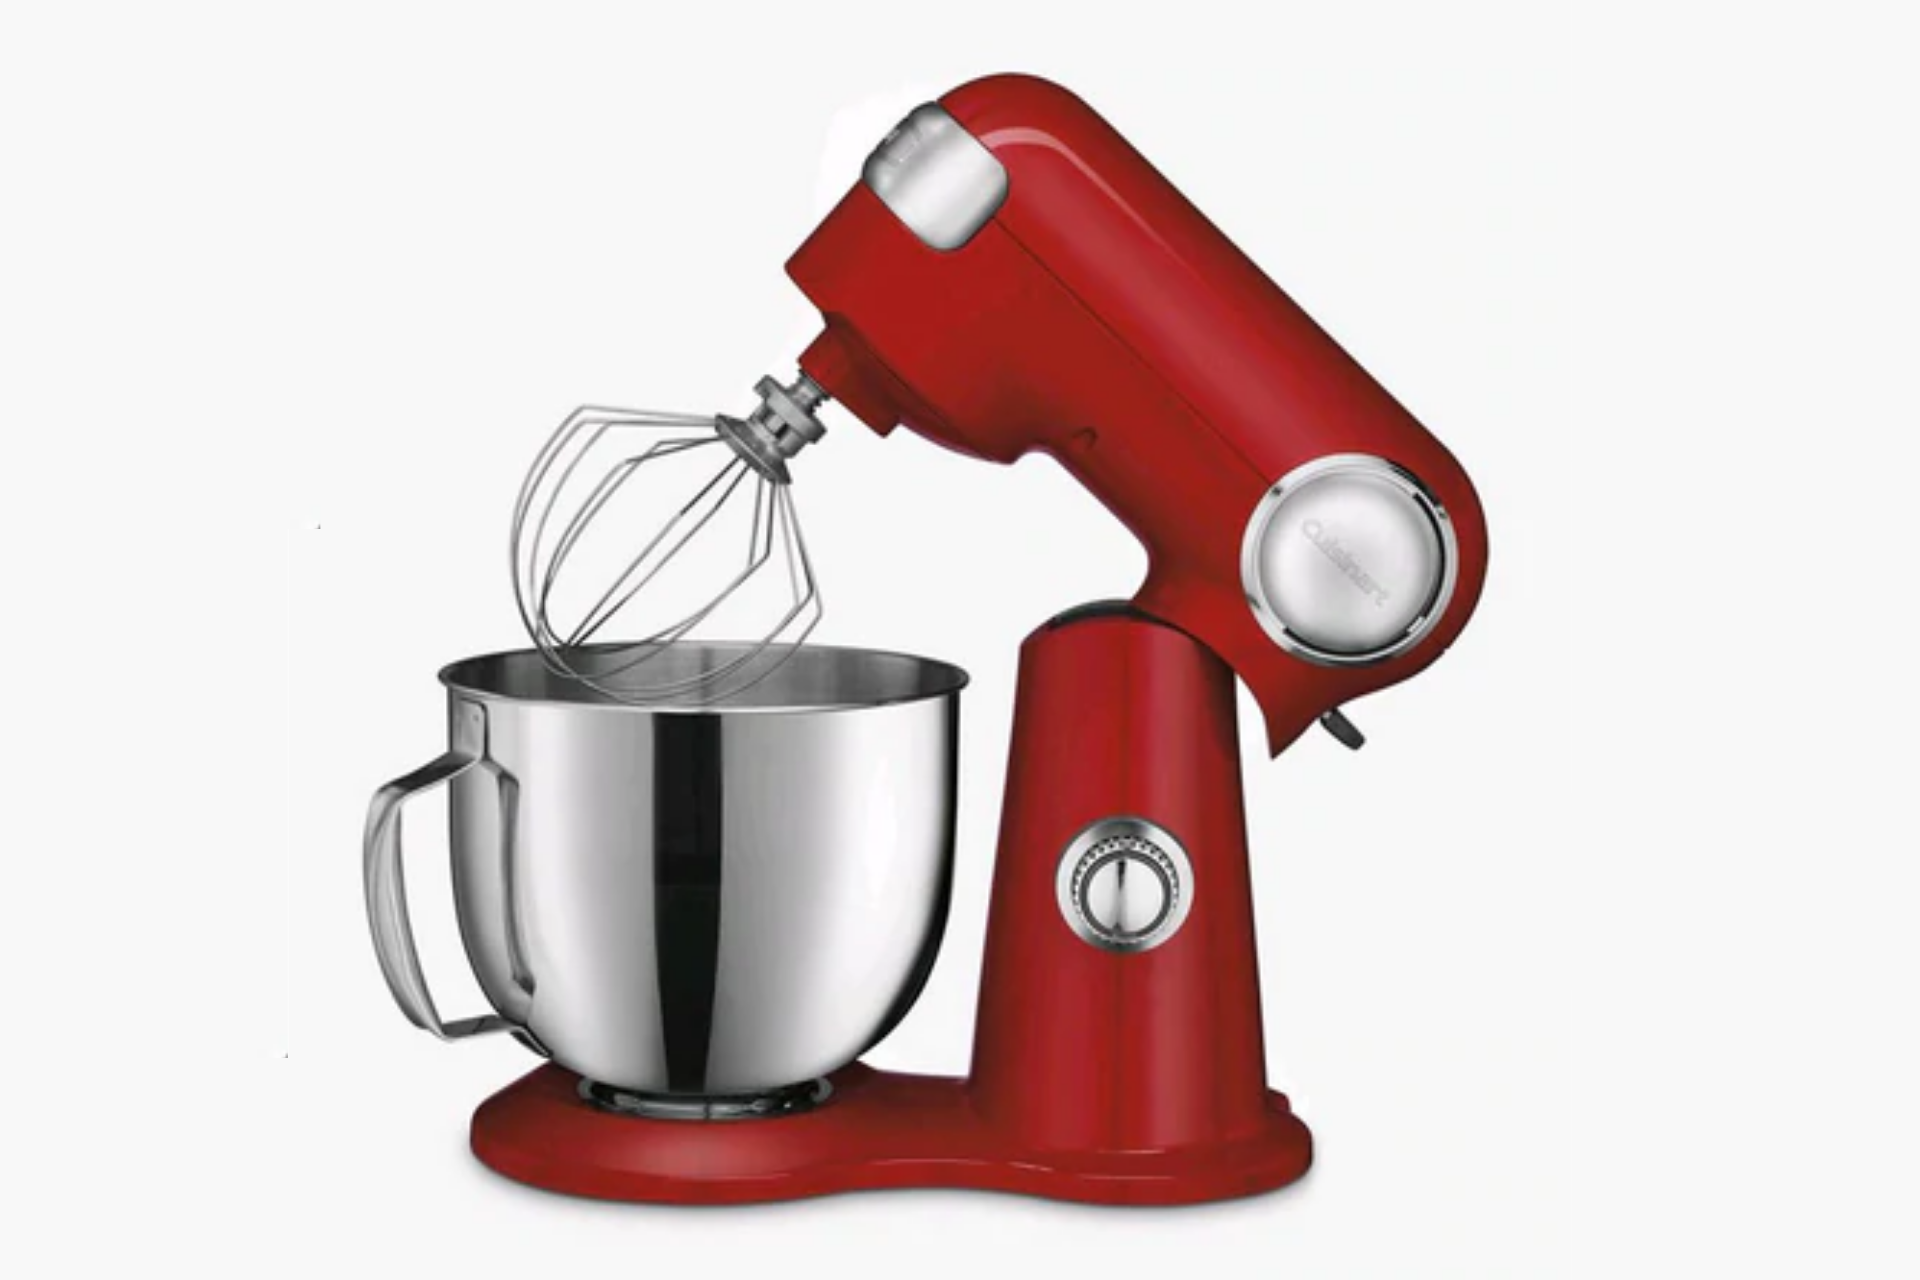 a red stand mixer